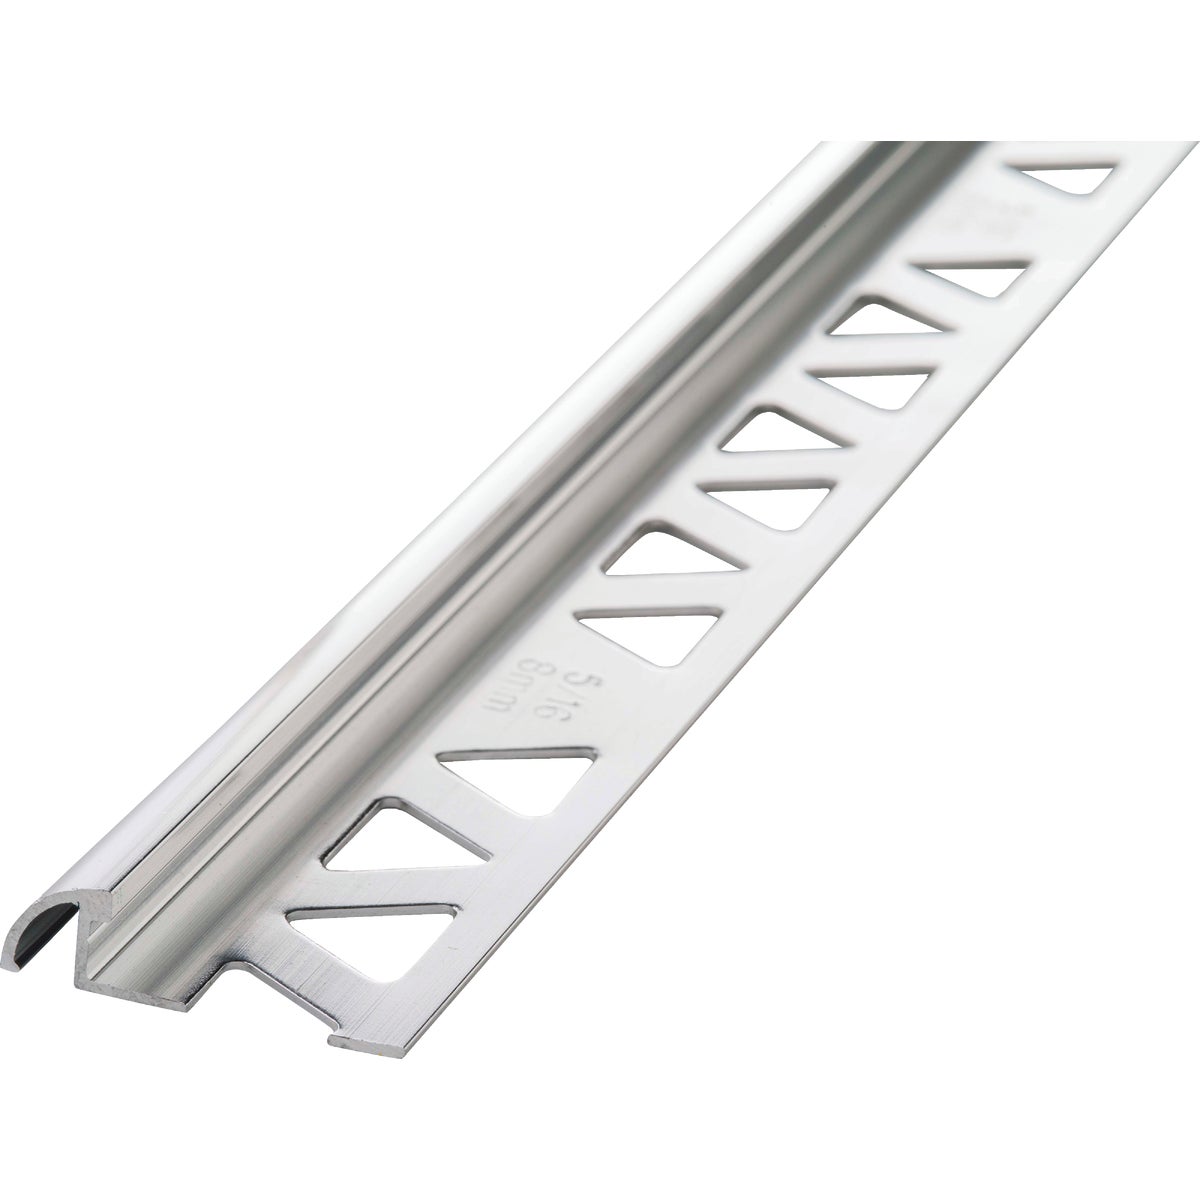 M-D Building Products 3/8 In. x 8 Ft. Bright Clear Aluminum Bullnose Tile Edging